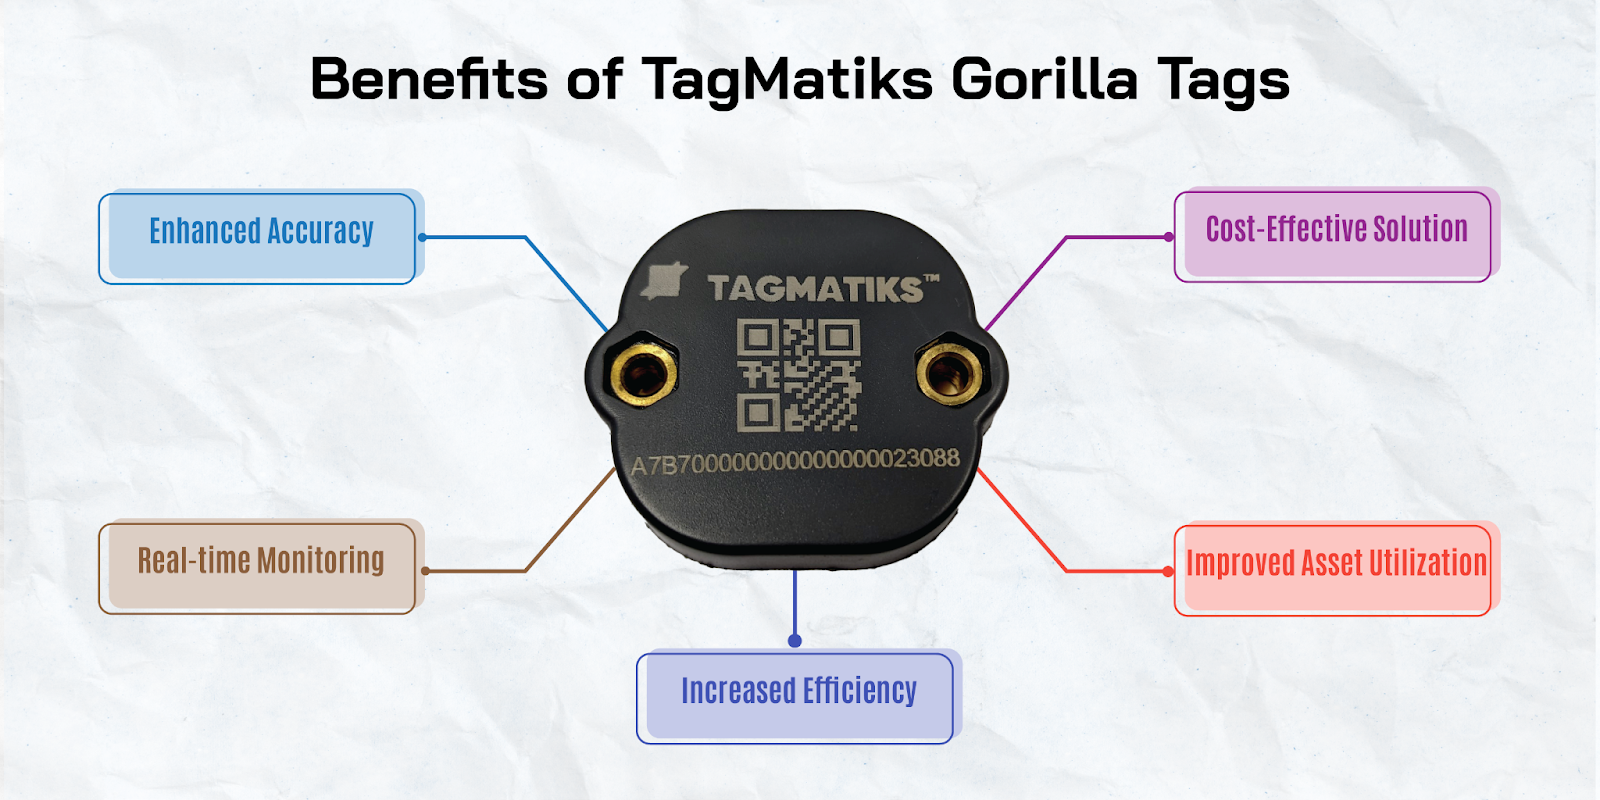 Benefits of Using TagMatiks Gorilla Tags for Industrial Asset Tracking